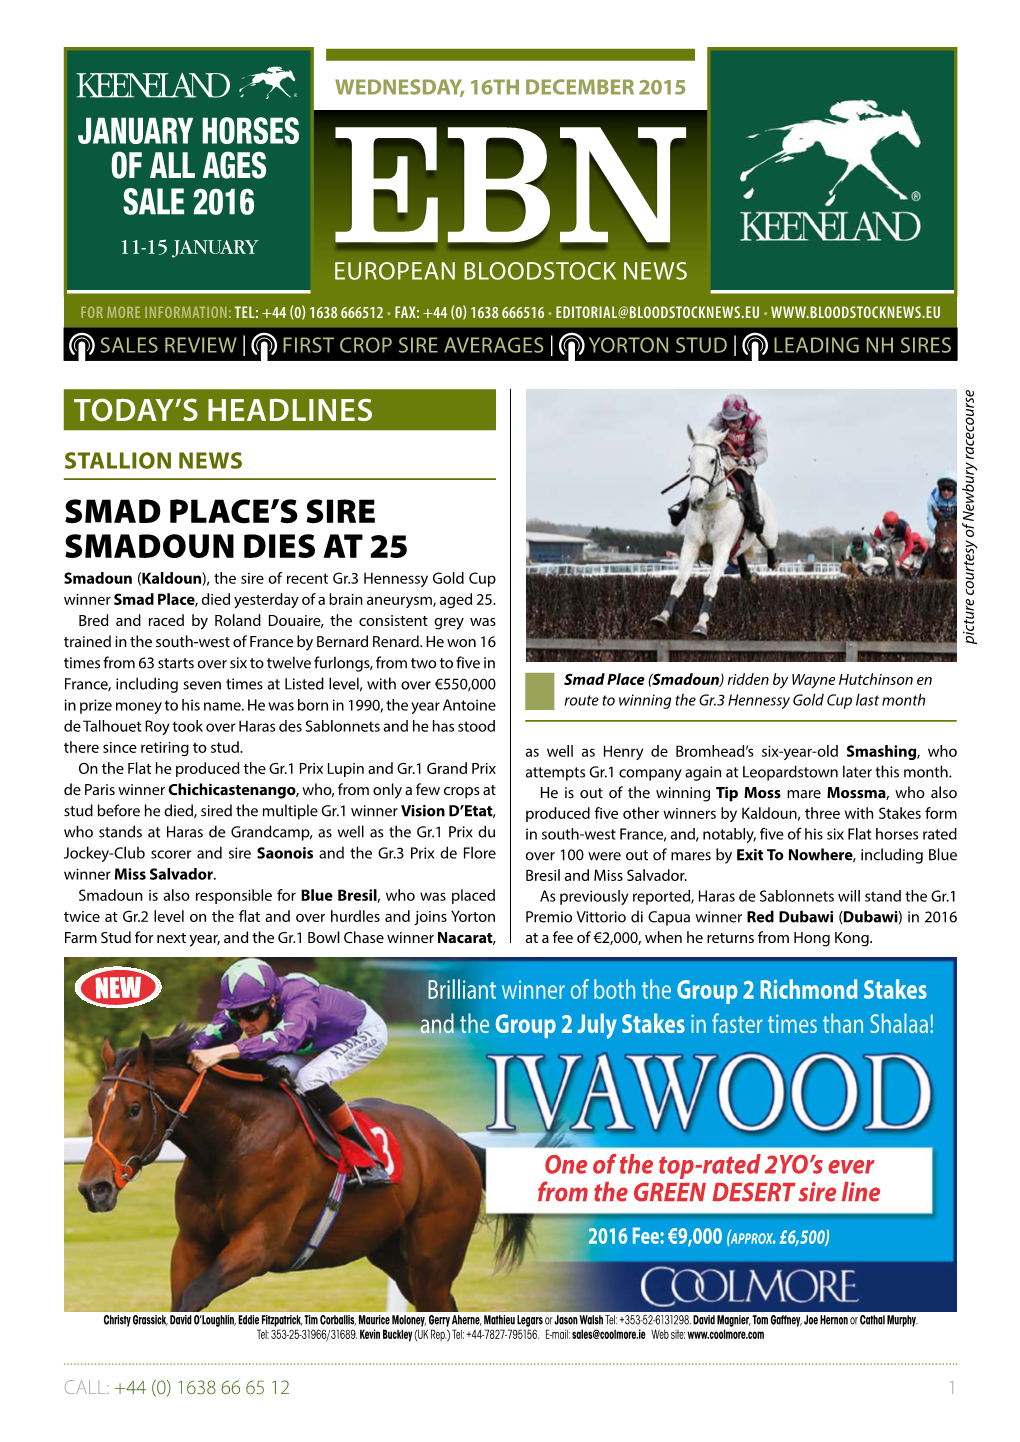 January Horses of All Ages Sale 2016 11-15 January Ebn European Bloodstock News